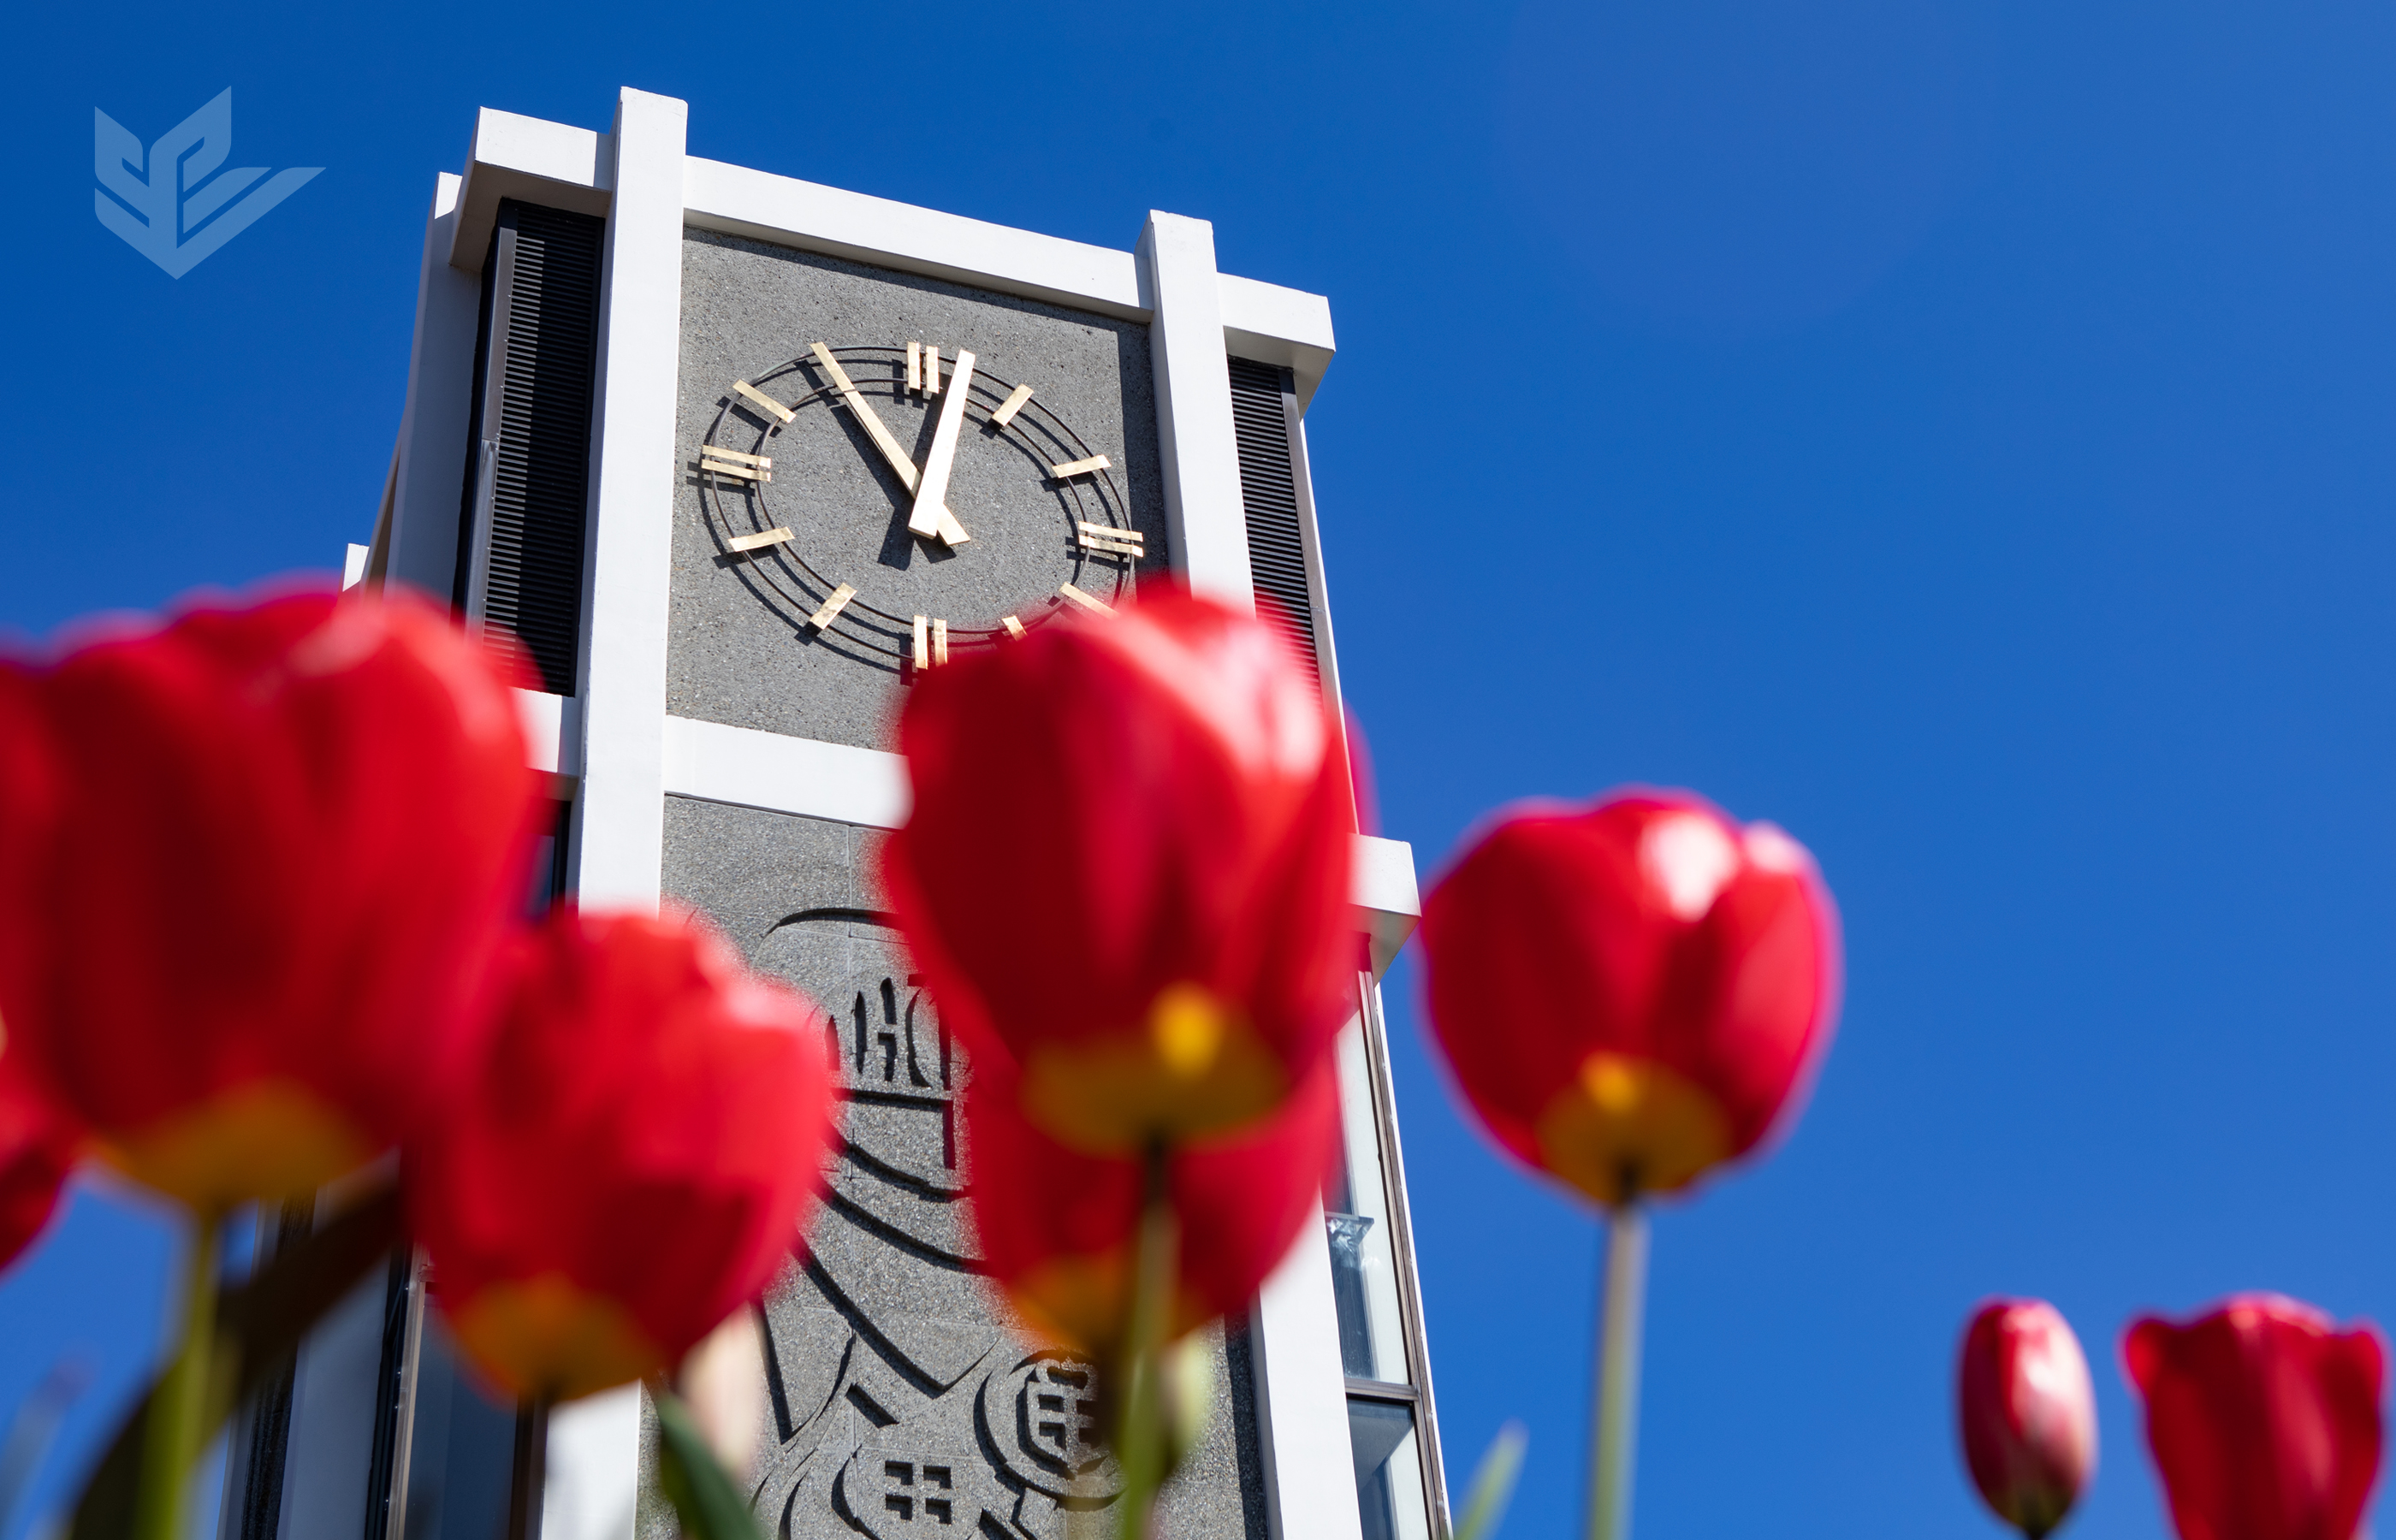 Bright red tulips in the foreground of a photo of Demaray Hall's iconic clocktower